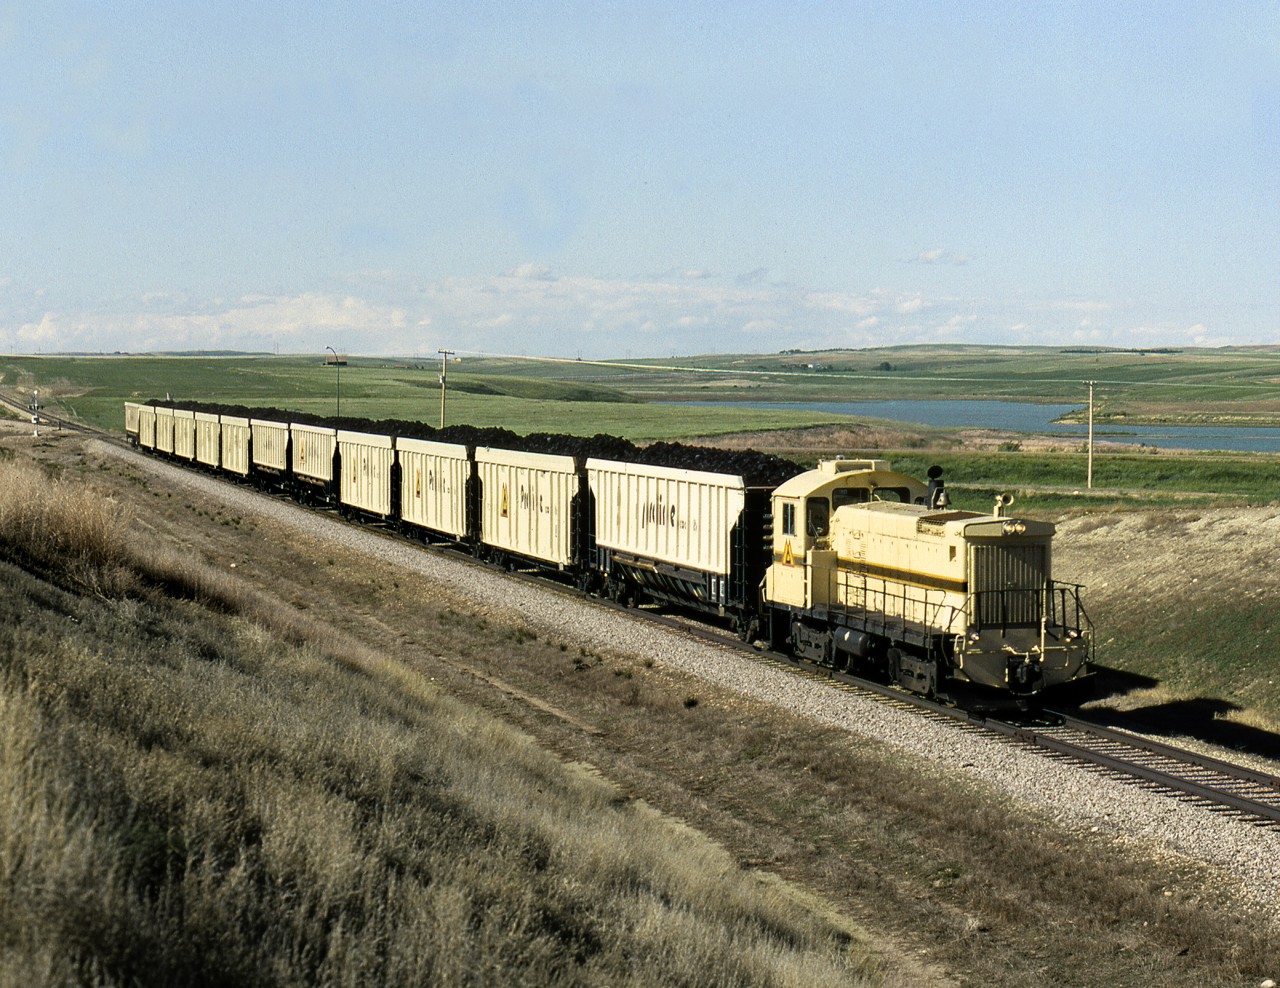 Prairie Coal Co. operates a 5 mile long line from its mine south to Saskatchewan Power's Poplar River generating station east of Coronach in south Central Saskatchewan. in 1991 they had 2 SW1001's on the Roster.